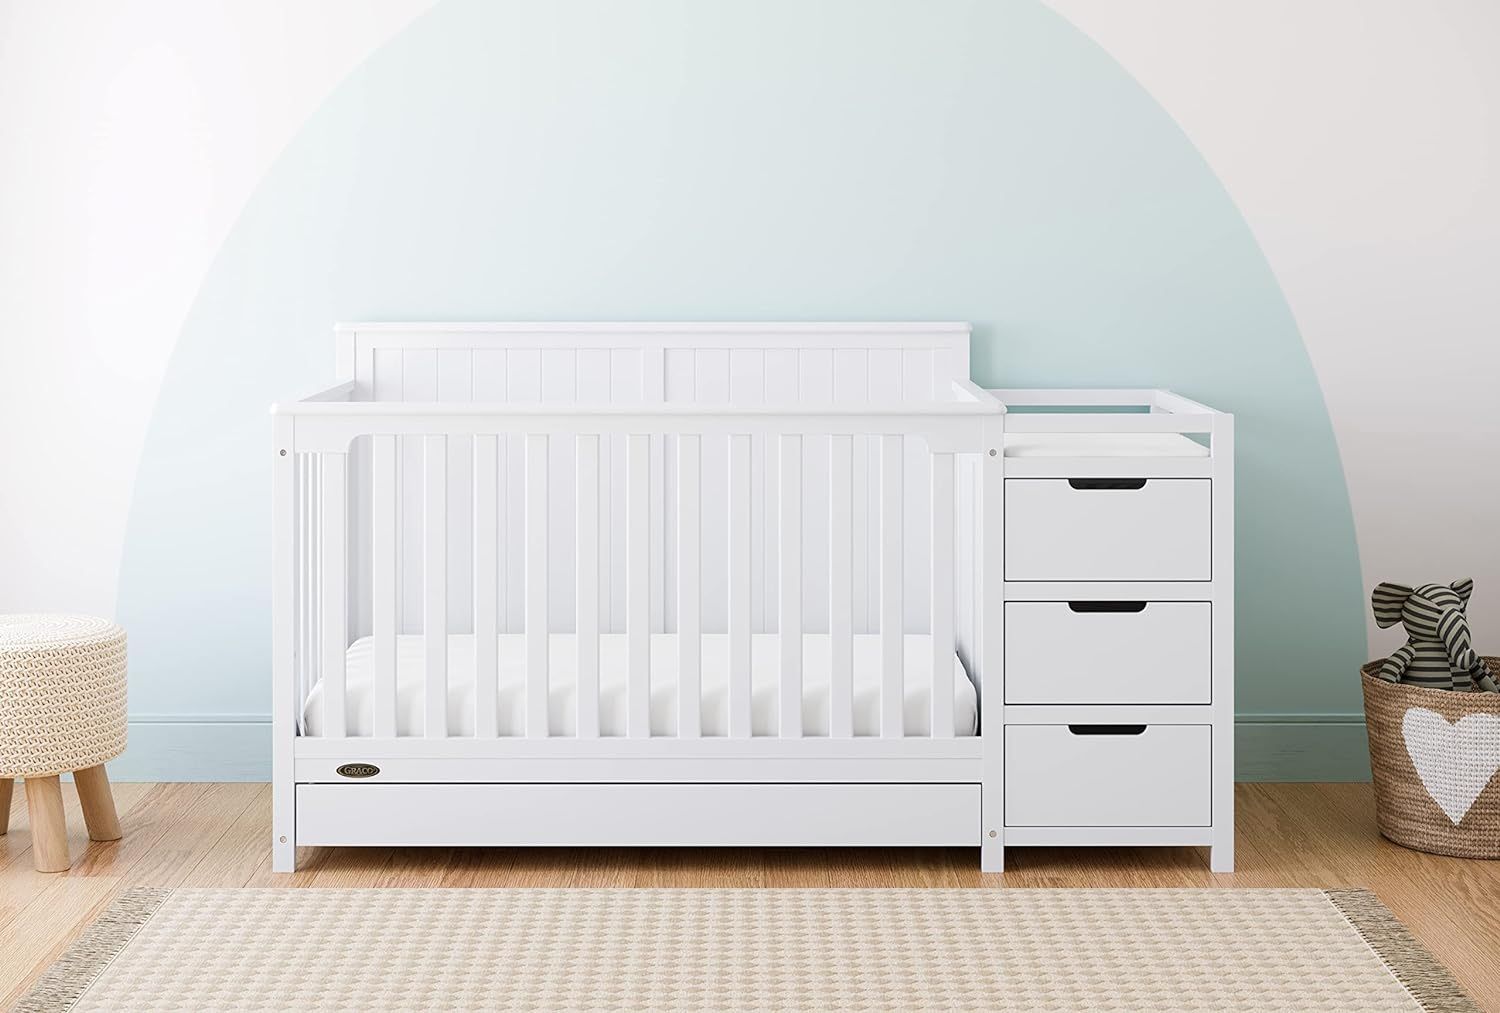 Graco Hadley 5-in-1 Convertible Crib and Changer with Drawer (White) – GREENGUARD Gold Certified, Crib and Changing Table Combo with Drawer